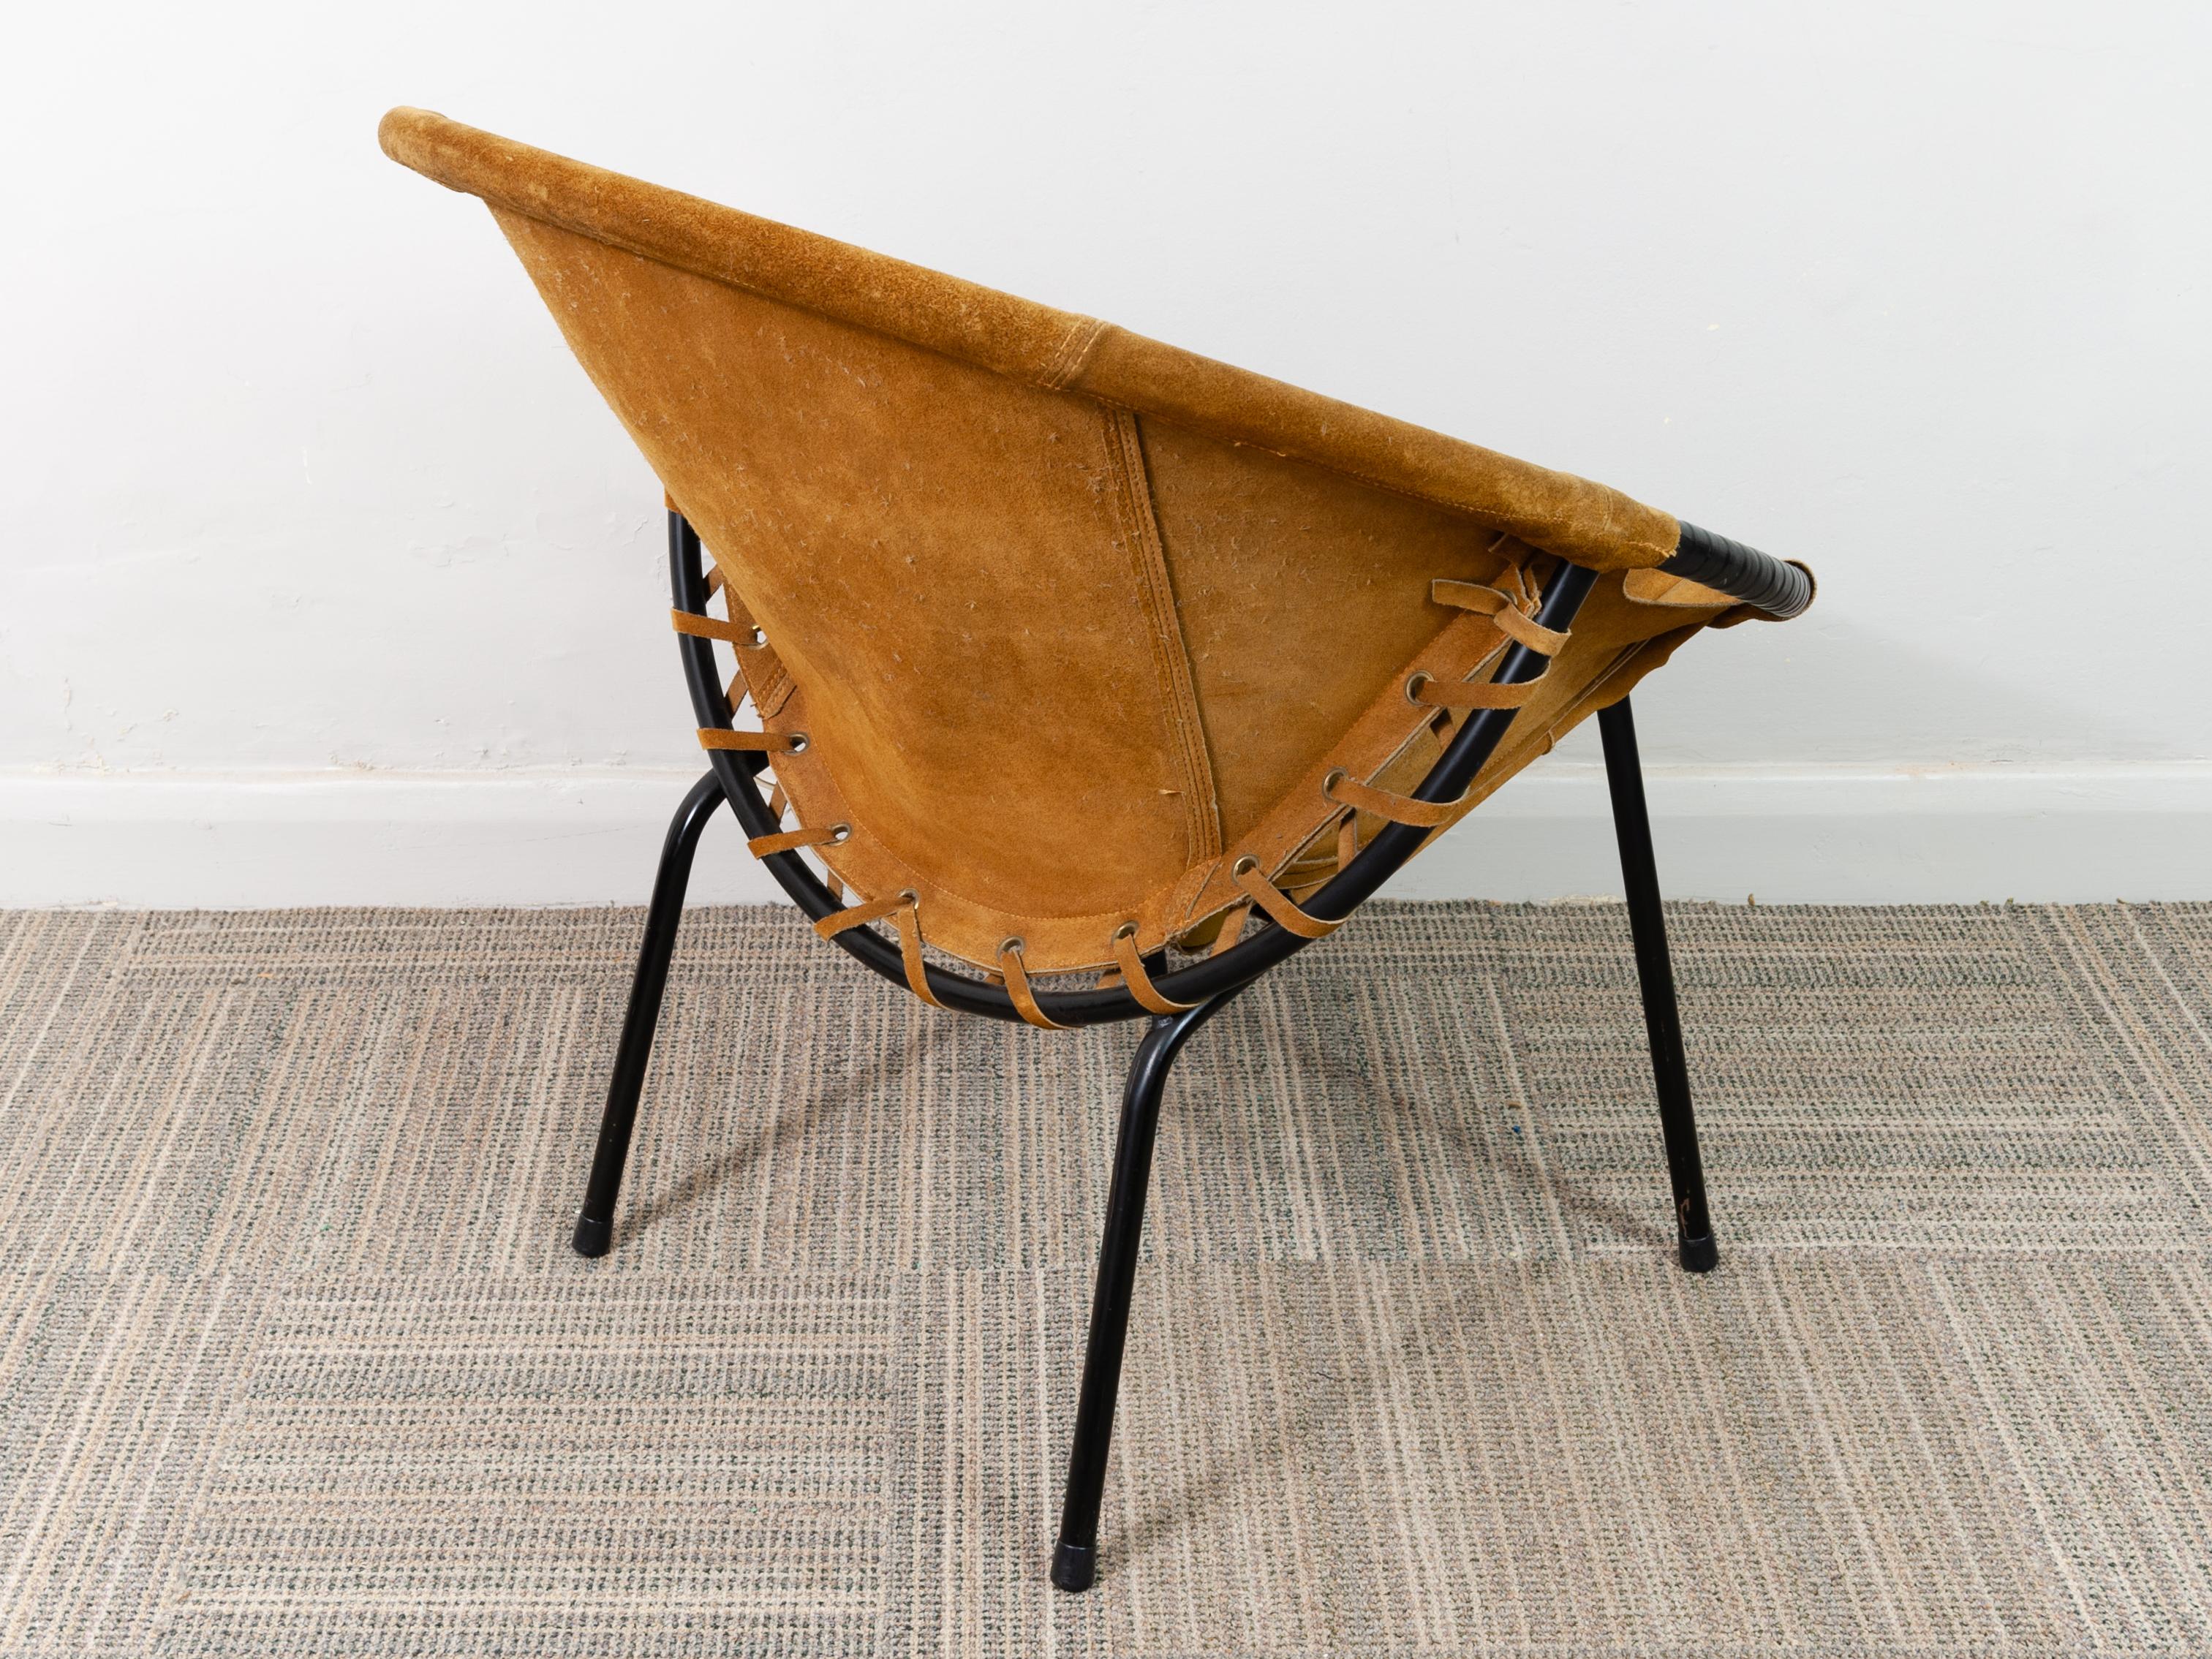 Enameled 1960s Suede Circle Balloon Chair by Lusch Erzeugnis for Lusch & Co.